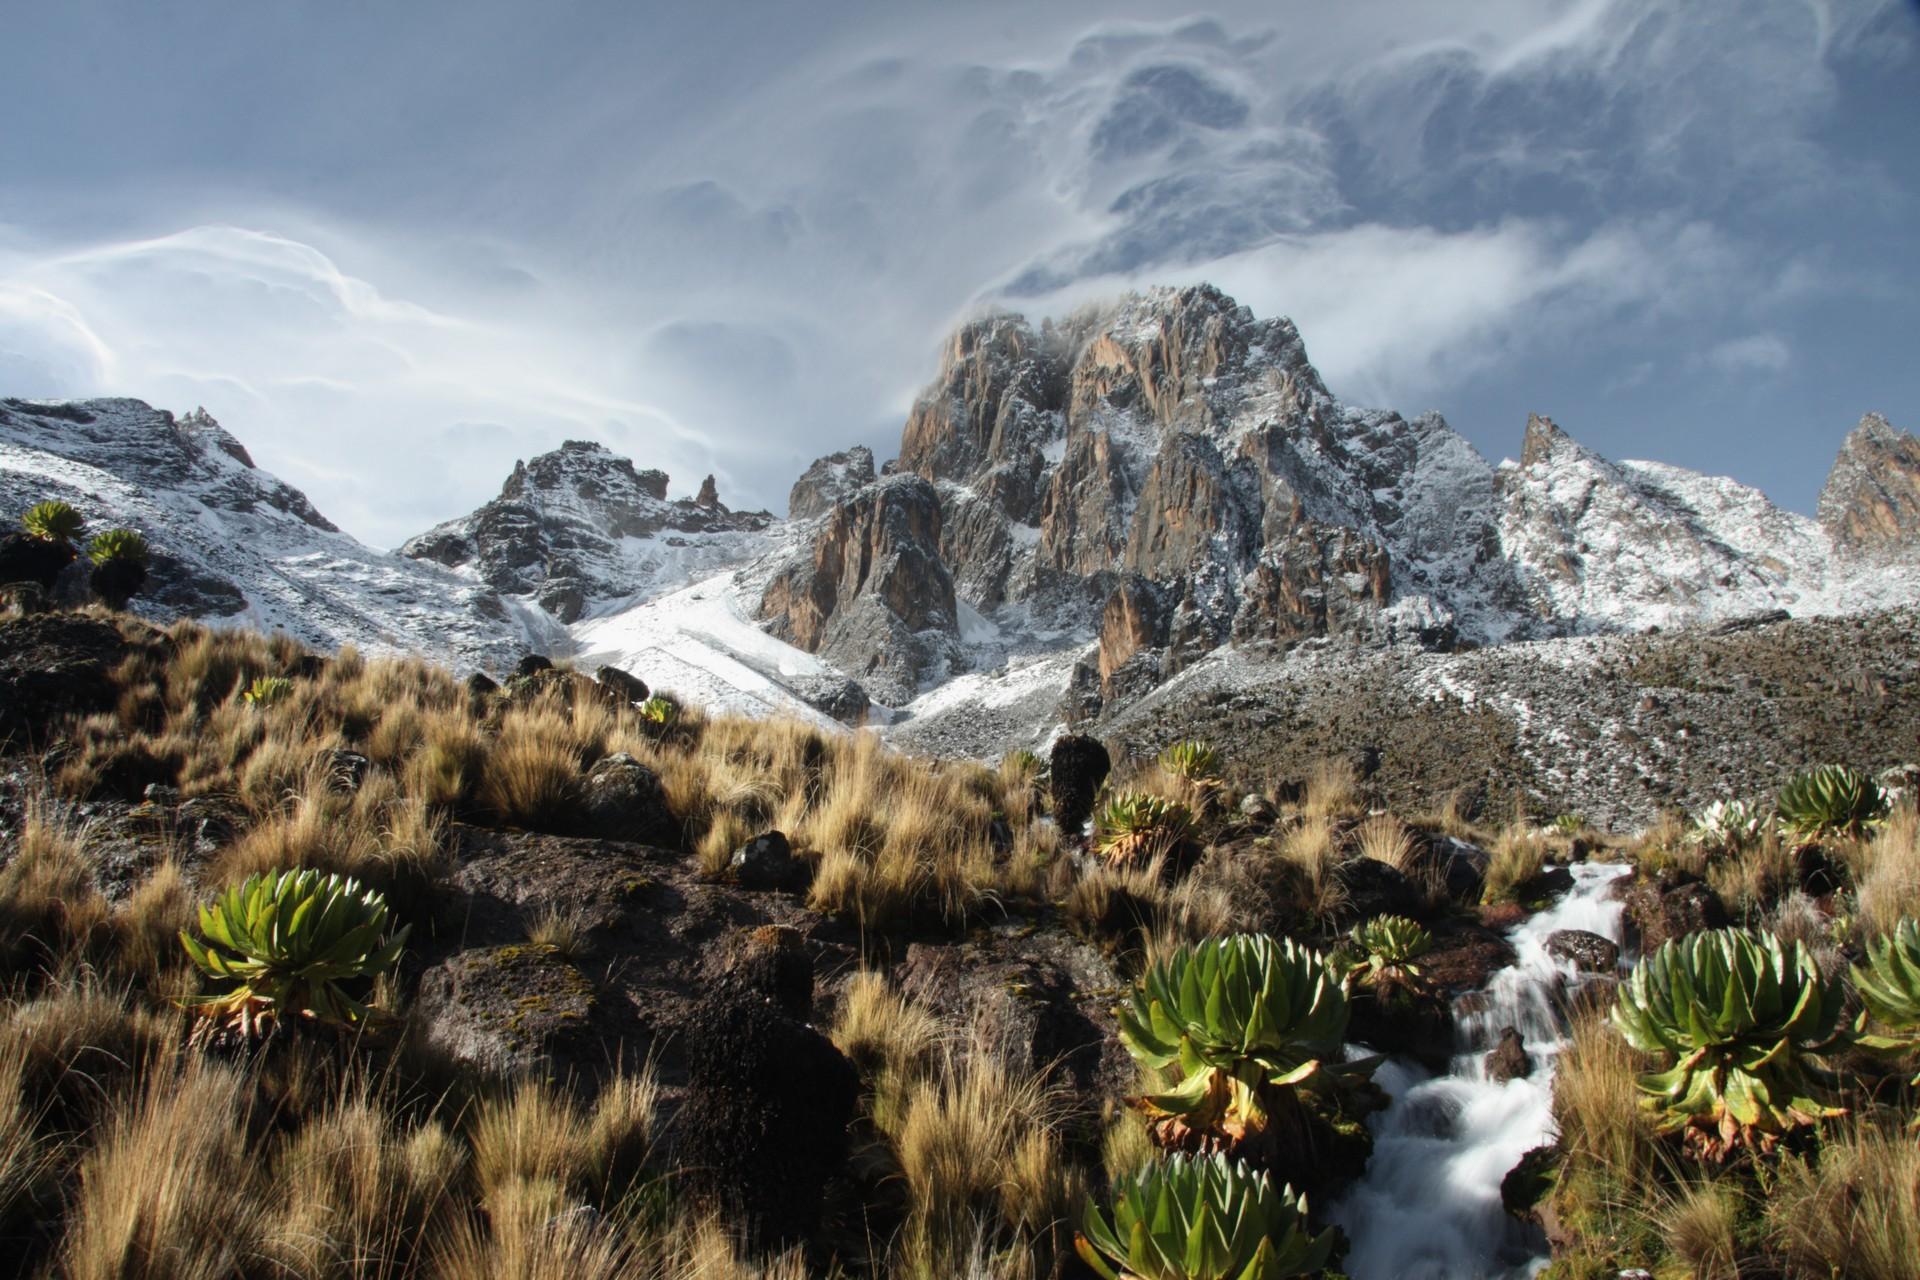 Mountain range in Mount Kenya National Park on a cloudy day